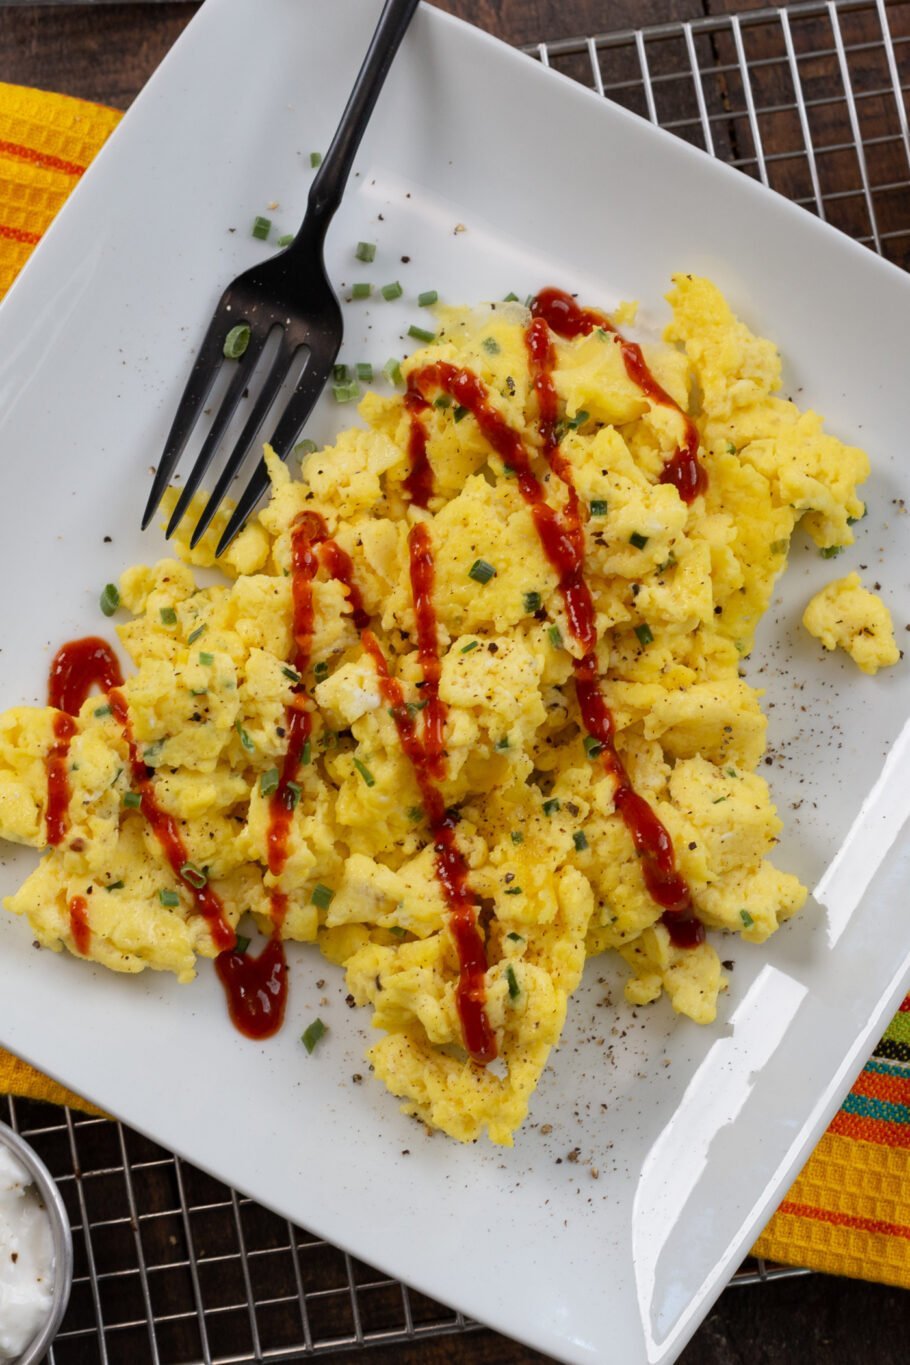 High-Protein Scrambled Eggs with Cottage Cheese - Skinnytaste